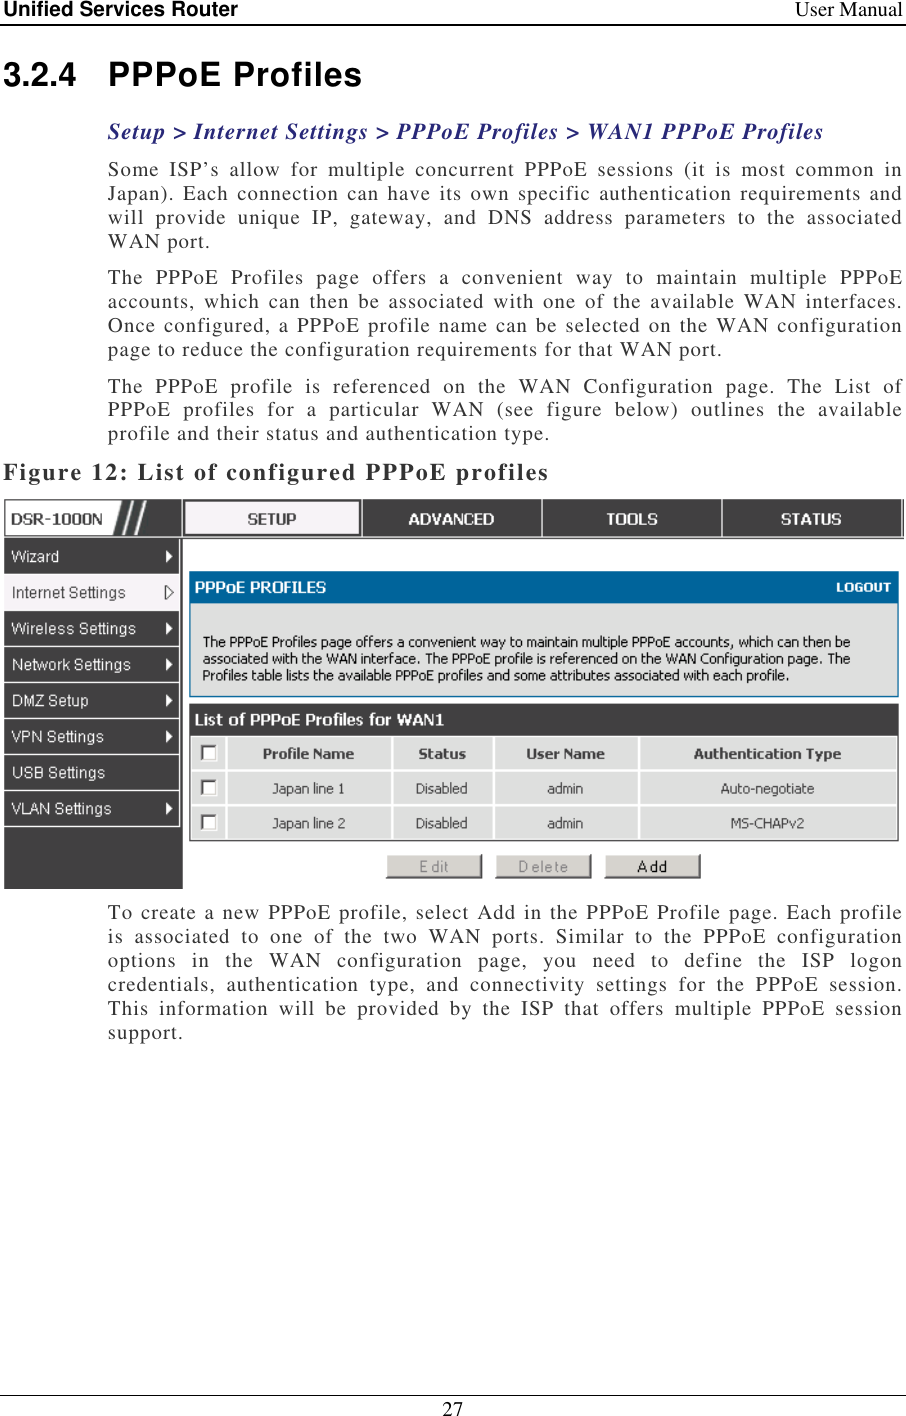 Unified Services Router    User Manual 27  3.2.4  PPPoE Profiles Setup &gt; Internet Settings &gt; PPPoE Profiles &gt; WAN1 PPPoE Profiles Some  ISP’s  allow  for  multiple  concurrent  PPPoE  sessions  (it  is  most  common  in Japan).  Each connection can have  its own  specific  authentication  requirements  and will  provide  unique  IP,  gateway,  and  DNS  address  parameters  to  the  associated WAN port.  The  PPPoE  Profiles  page  offers  a  convenient  way  to  maintain  multiple  PPPoE accounts,  which  can  then  be  associated  with  one  of  the  available  WAN  interfaces. Once configured, a PPPoE profile  name can be selected on  the WAN configuration page to reduce the configuration requirements for that WAN port.  The  PPPoE  profile  is  referenced  on  the  WAN  Configuration  page.  The  List  of PPPoE  profiles  for  a  particular  WAN  (see  figure  below)  outlines  the  available profile and their status and authentication type. Figure 12: List of configured PPPoE profiles  To create a new PPPoE profile, select Add in the PPPoE Profile page. Each profile is  associated  to  one  of  the  two  WAN  ports.  Similar  to  the  PPPoE  configuration options  in  the  WAN  configuration  page,  you  need  to  define  the  ISP  logon credentials,  authentication  type,  and  connectivity  settings  for  the  PPPoE  session. This  information  will  be  provided  by  the  ISP  that  offers  multiple  PPPoE  session support.  